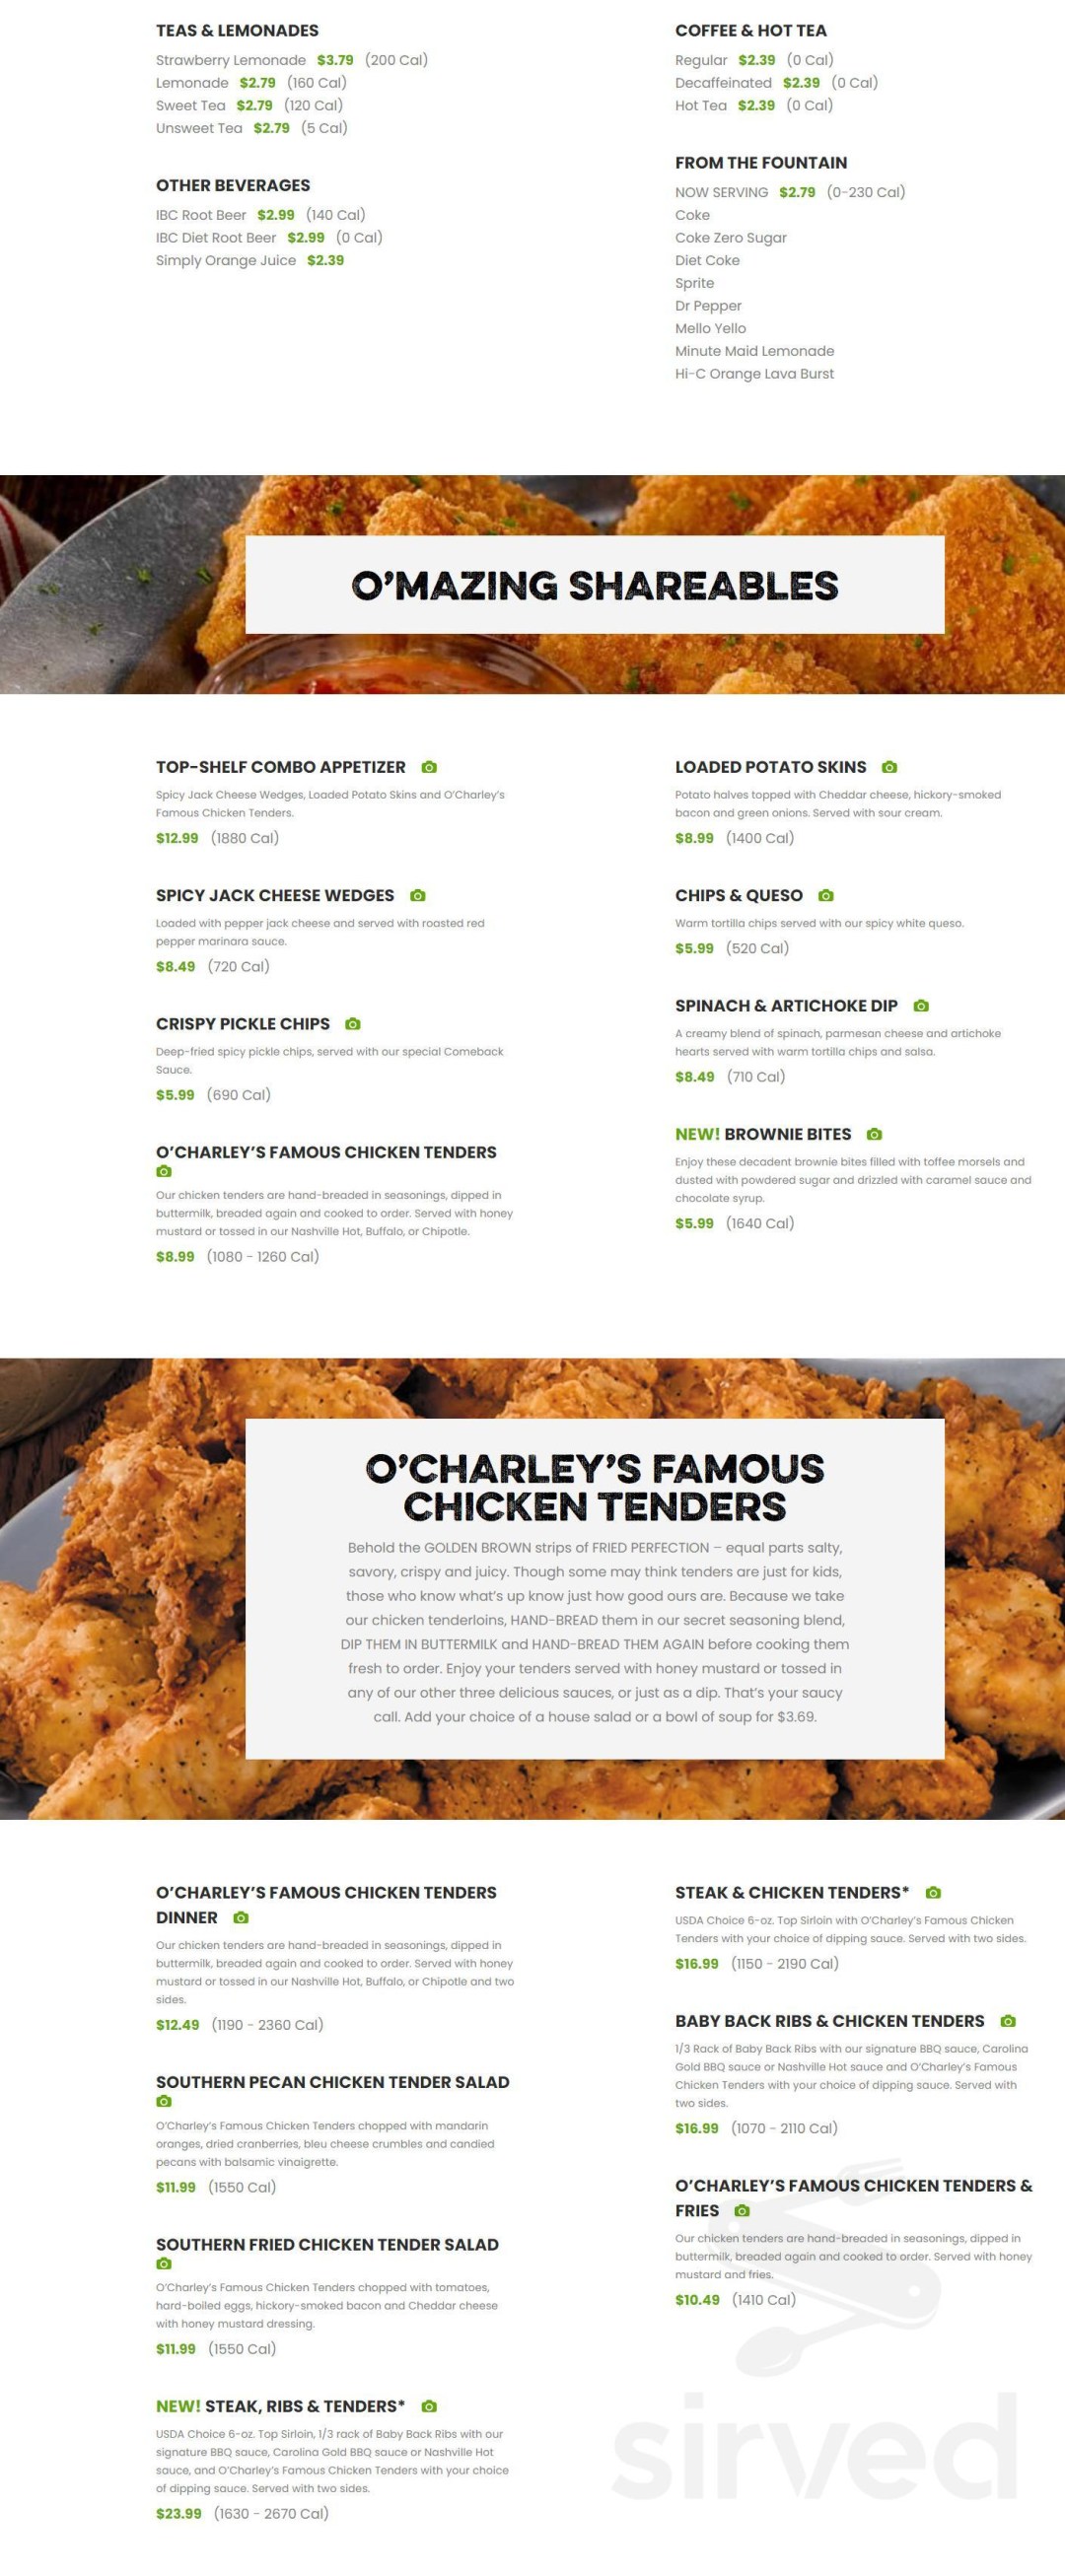 Picture of: O’Charley’s Restaurant & Bar menu in Bartlett, Tennessee, USA